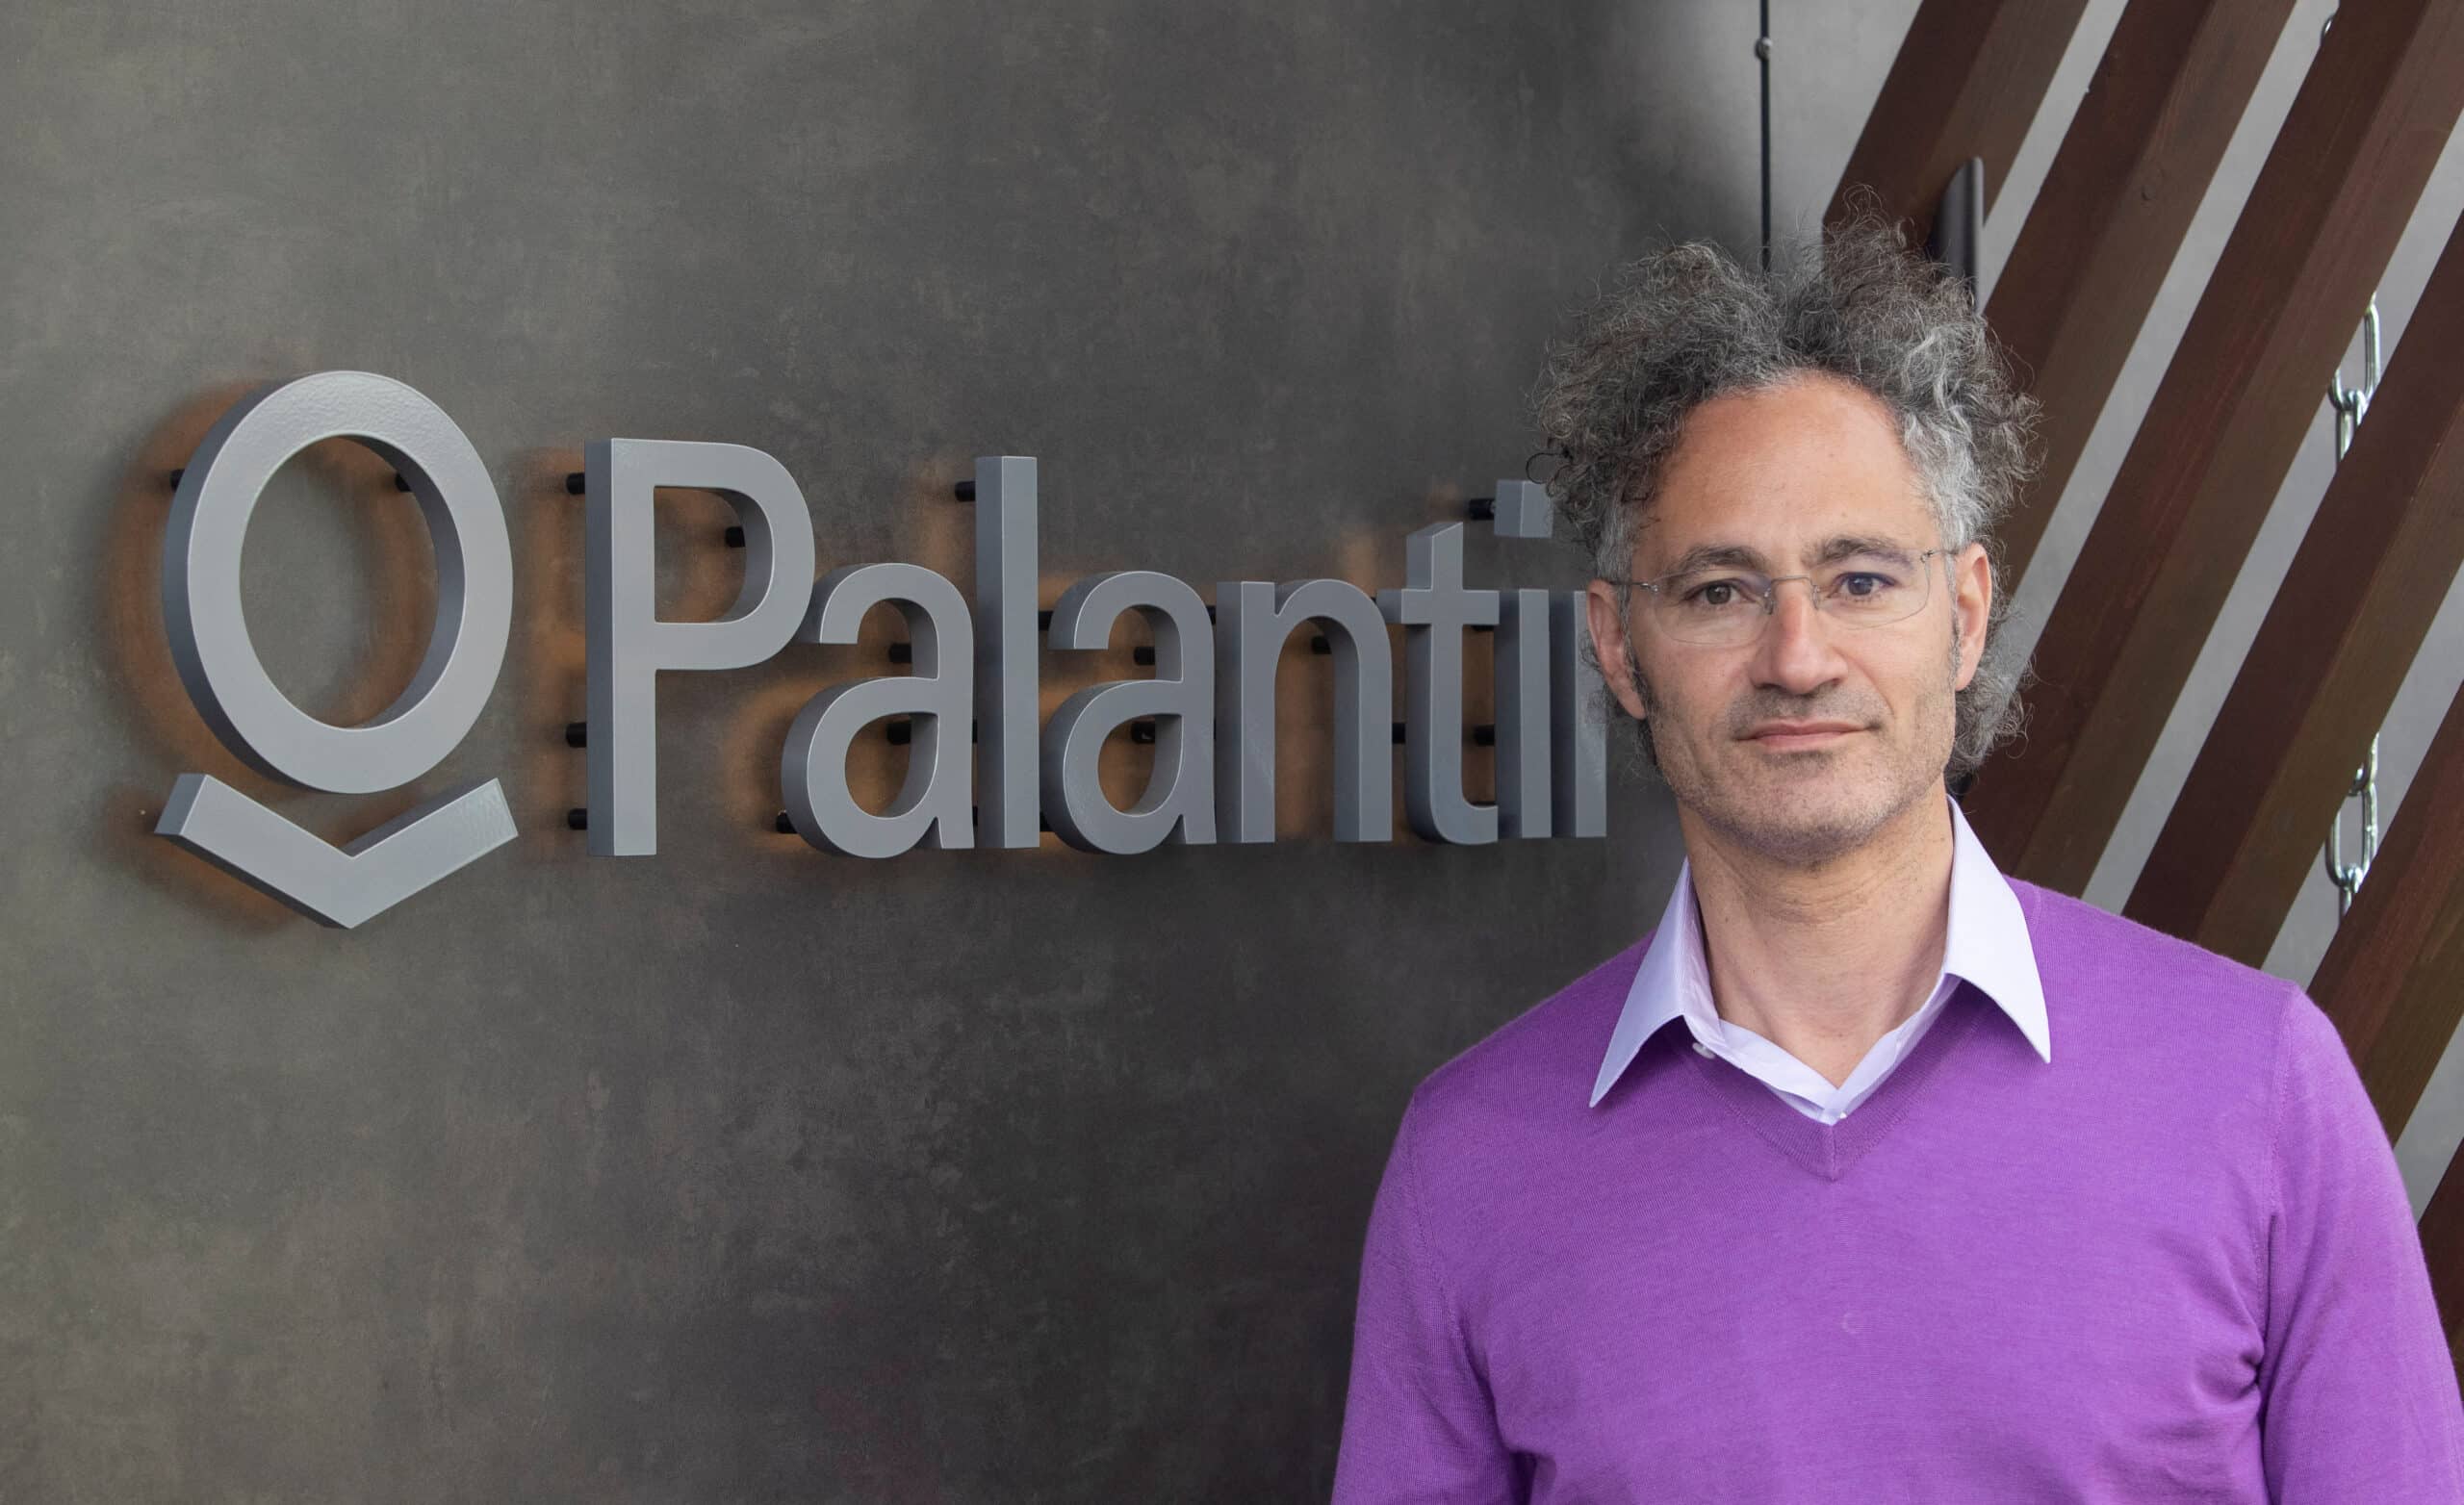 Palantir Ceo Raises Concerns over Selling Powerful Ai Technology to Certain Clients